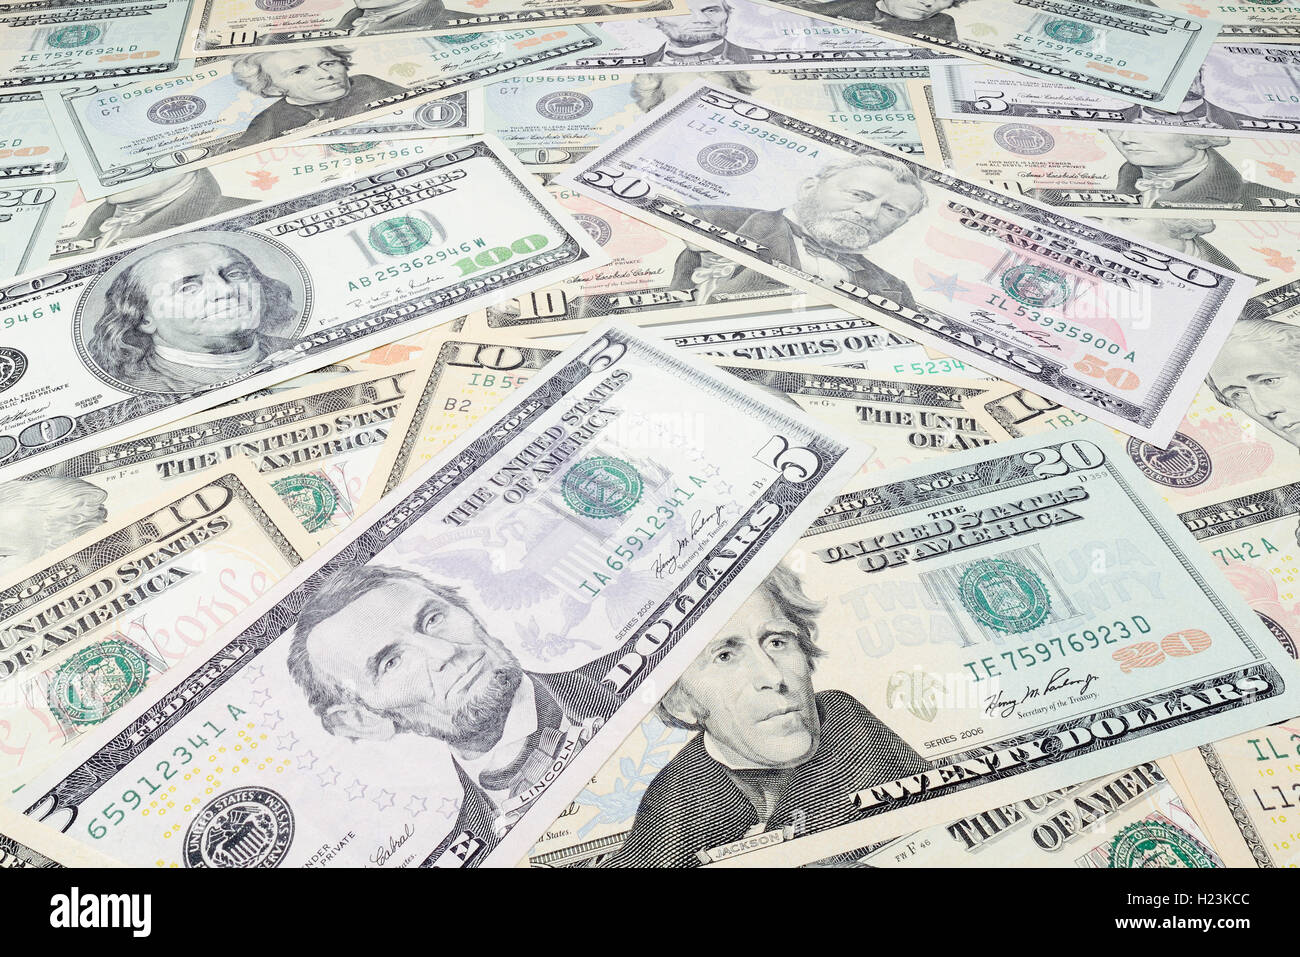 Various US dollar bills in a pile Stock Photo